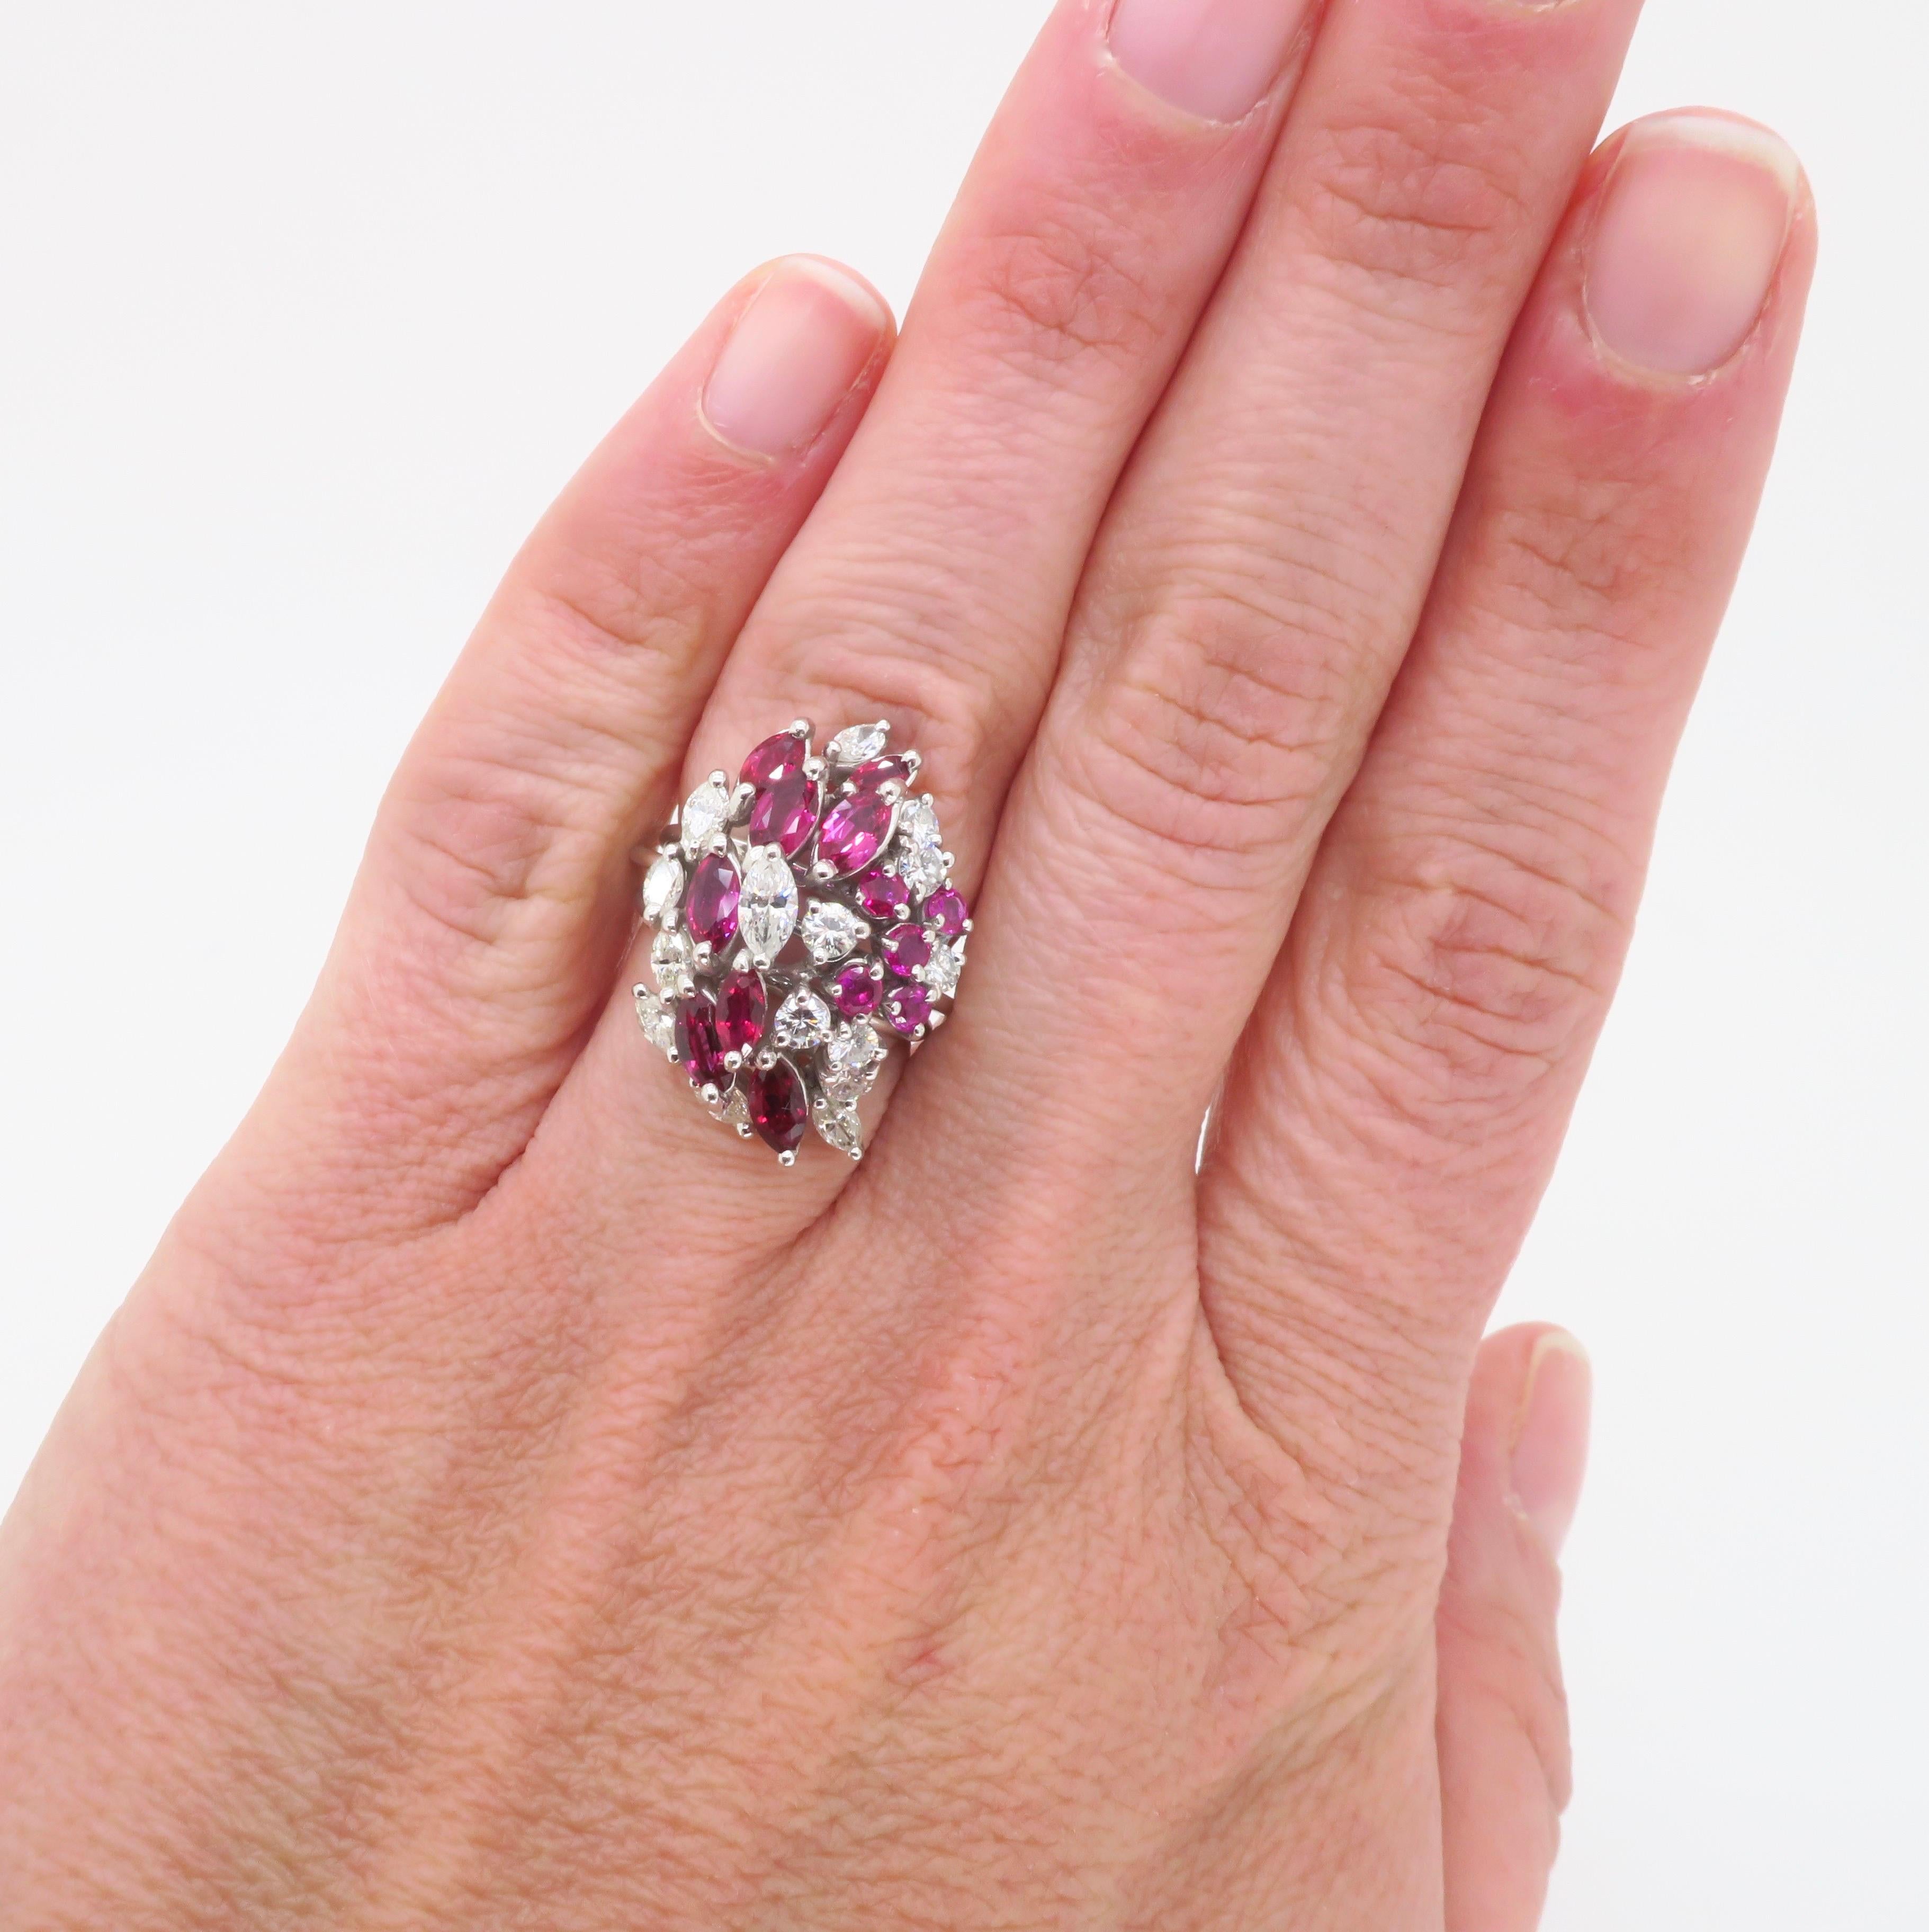 Multi-shaped Ruby & Diamond Cluster ring made in Platinum. 

Gemstone: Ruby and Diamond
Diamond Carat Weight: Approximately 1.05CTW
Diamond Cut: Round Brilliant & Marquise Cut
Color: Average F-G
Clarity: Average VS
Metal: Platinum 
Marked/Tested: